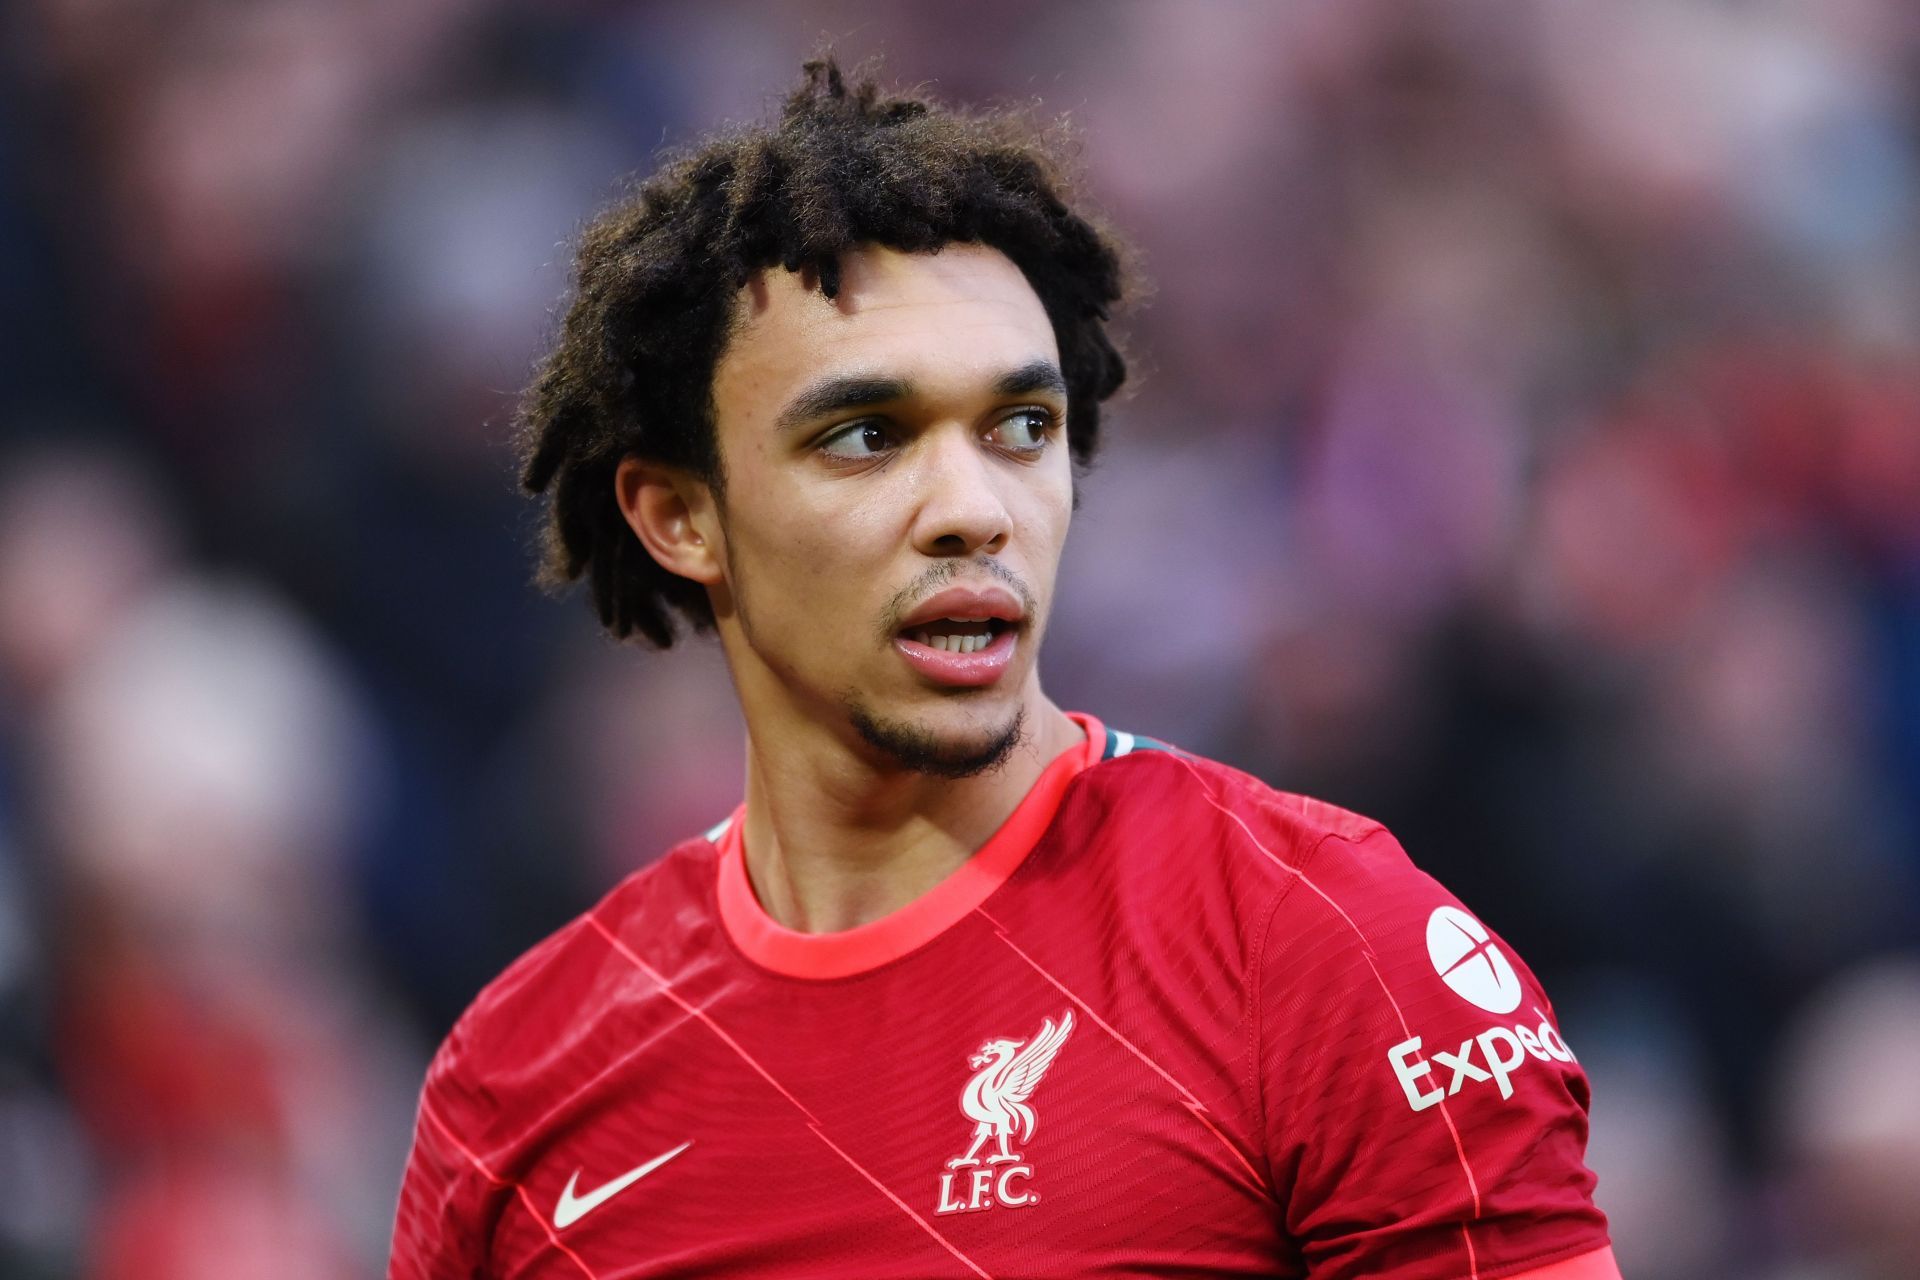 Liverpool right-back Trent Alexander-Arnold continues to be a creative menace.